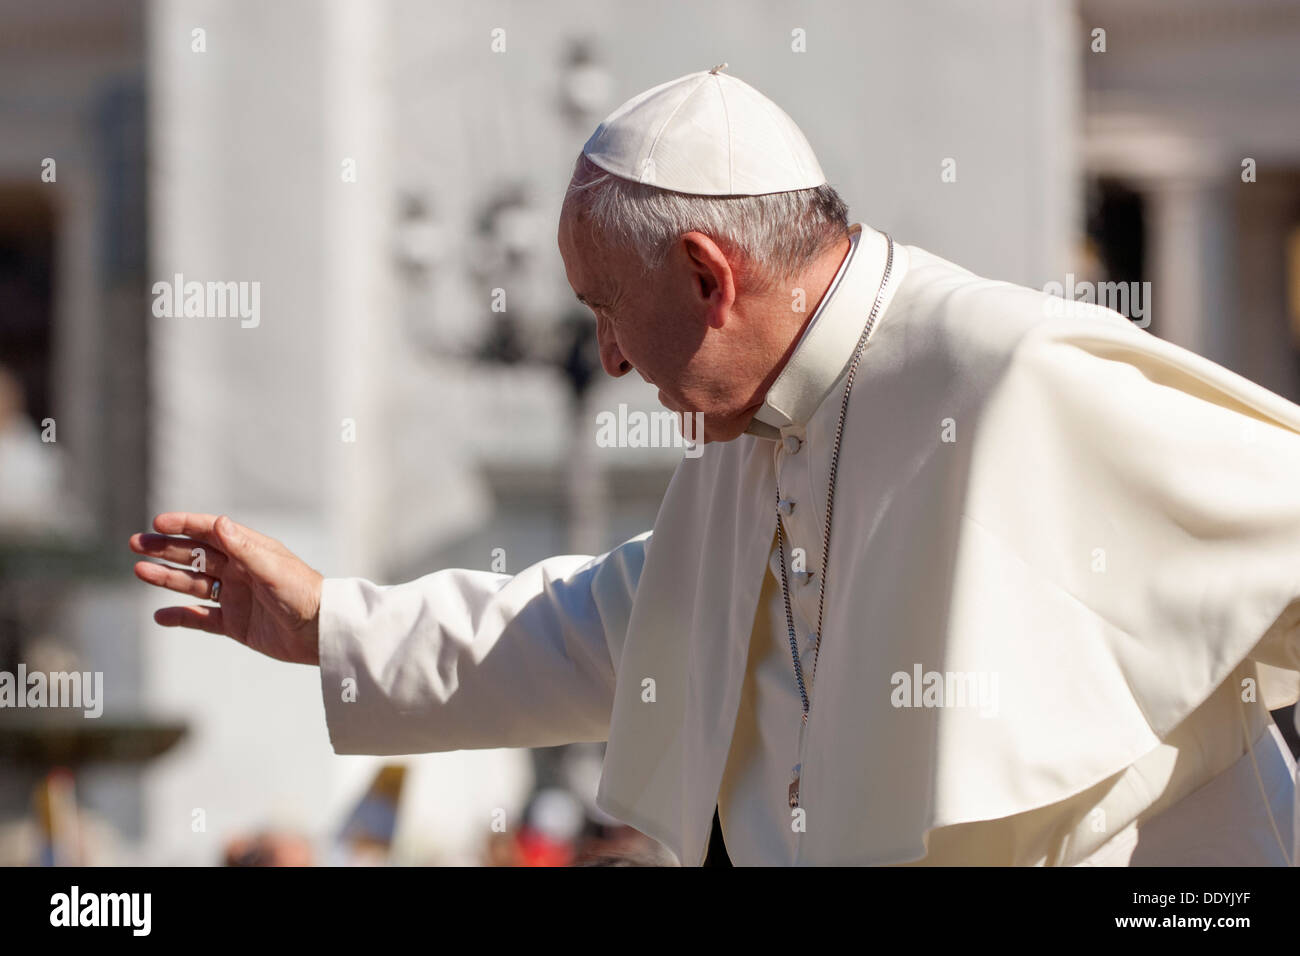 Pope Francesco greets the faithful in St. Peter's Square. Stock Photo